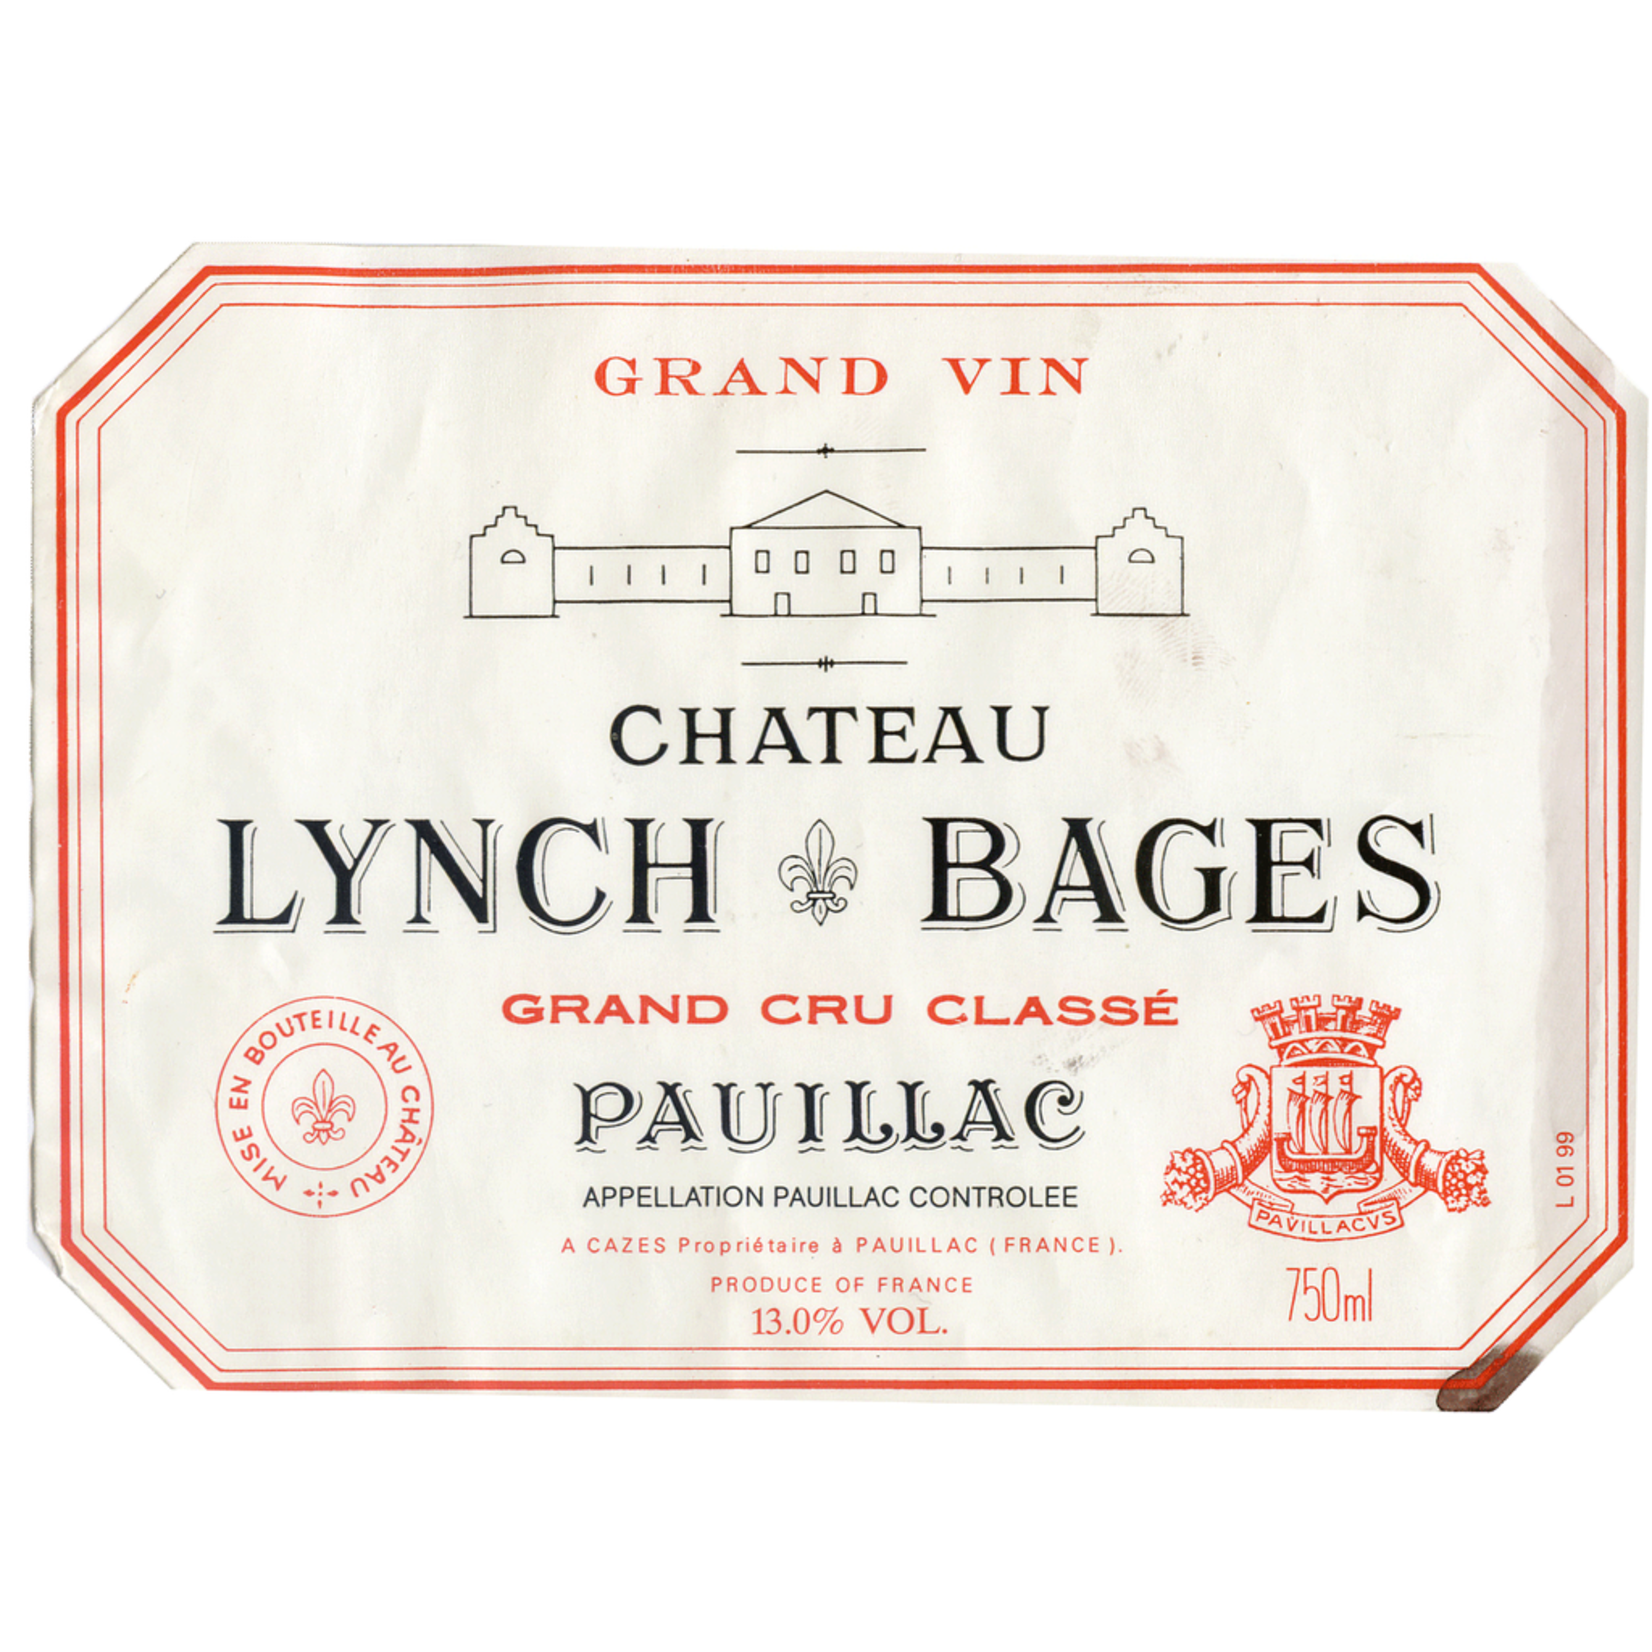 Wine Chateau Lynch Bages Pauillac 2000